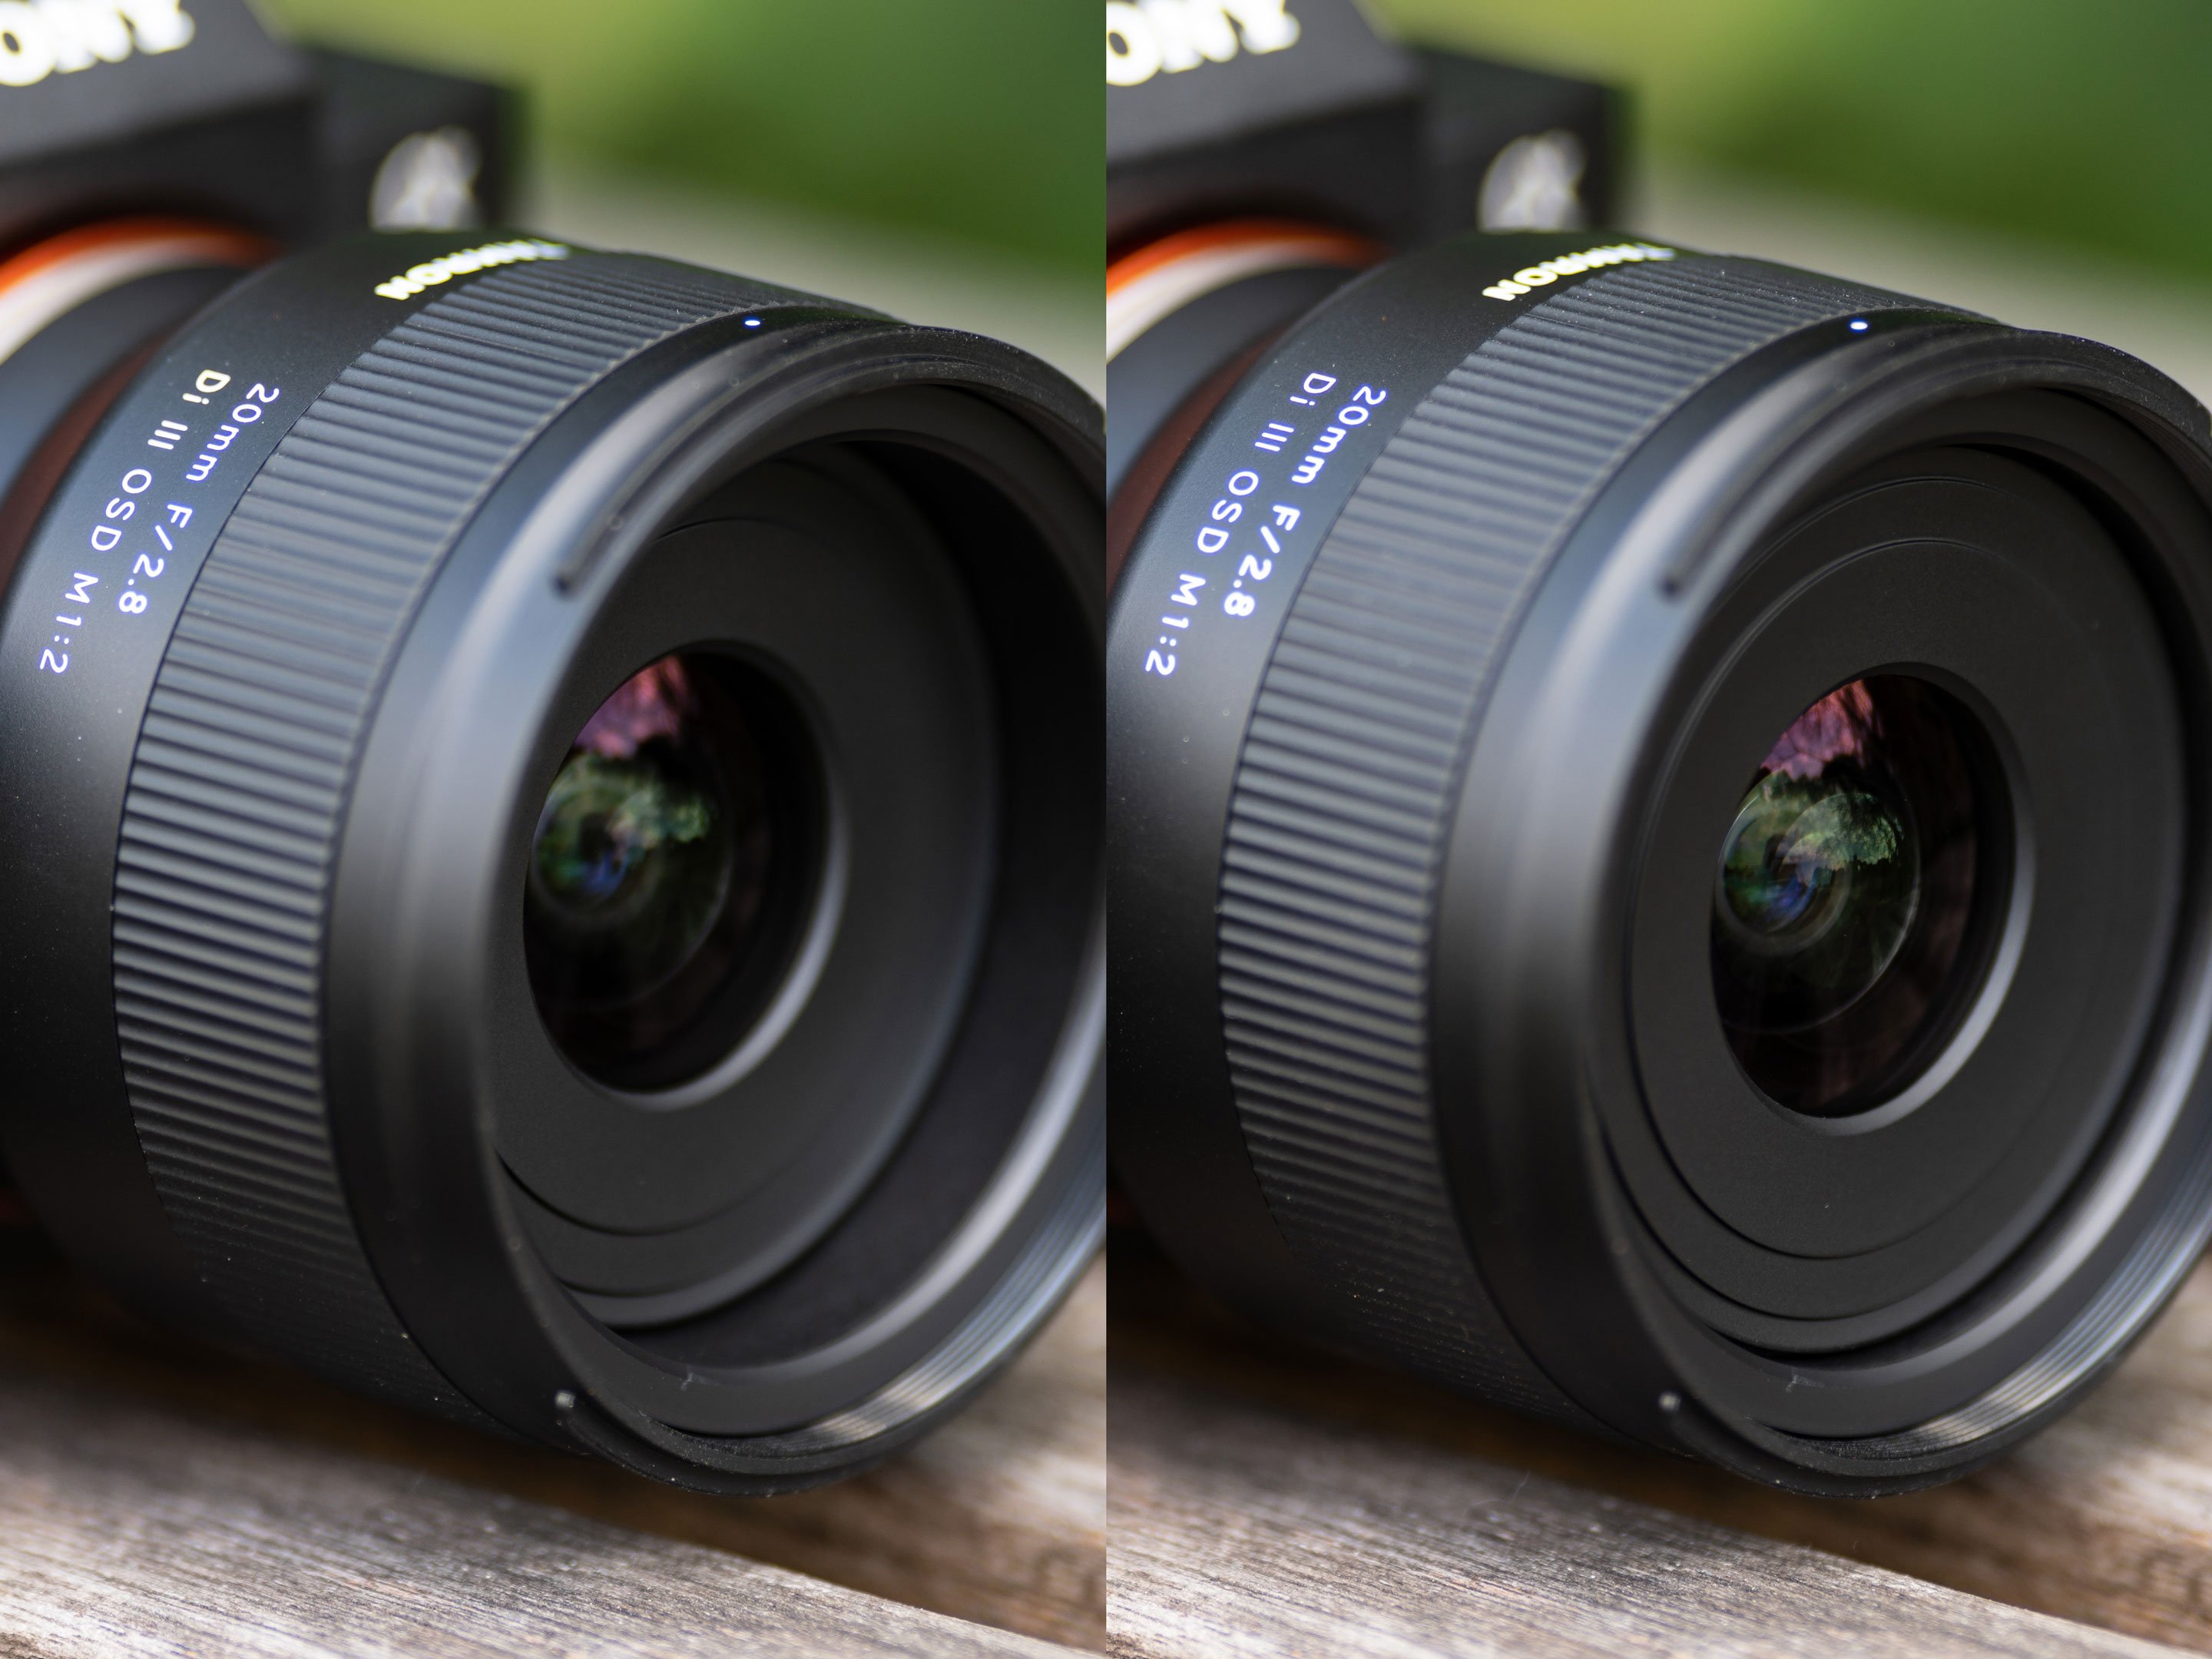 Tamron 20mm f2.8 Di III M1:2 review | Cameralabs